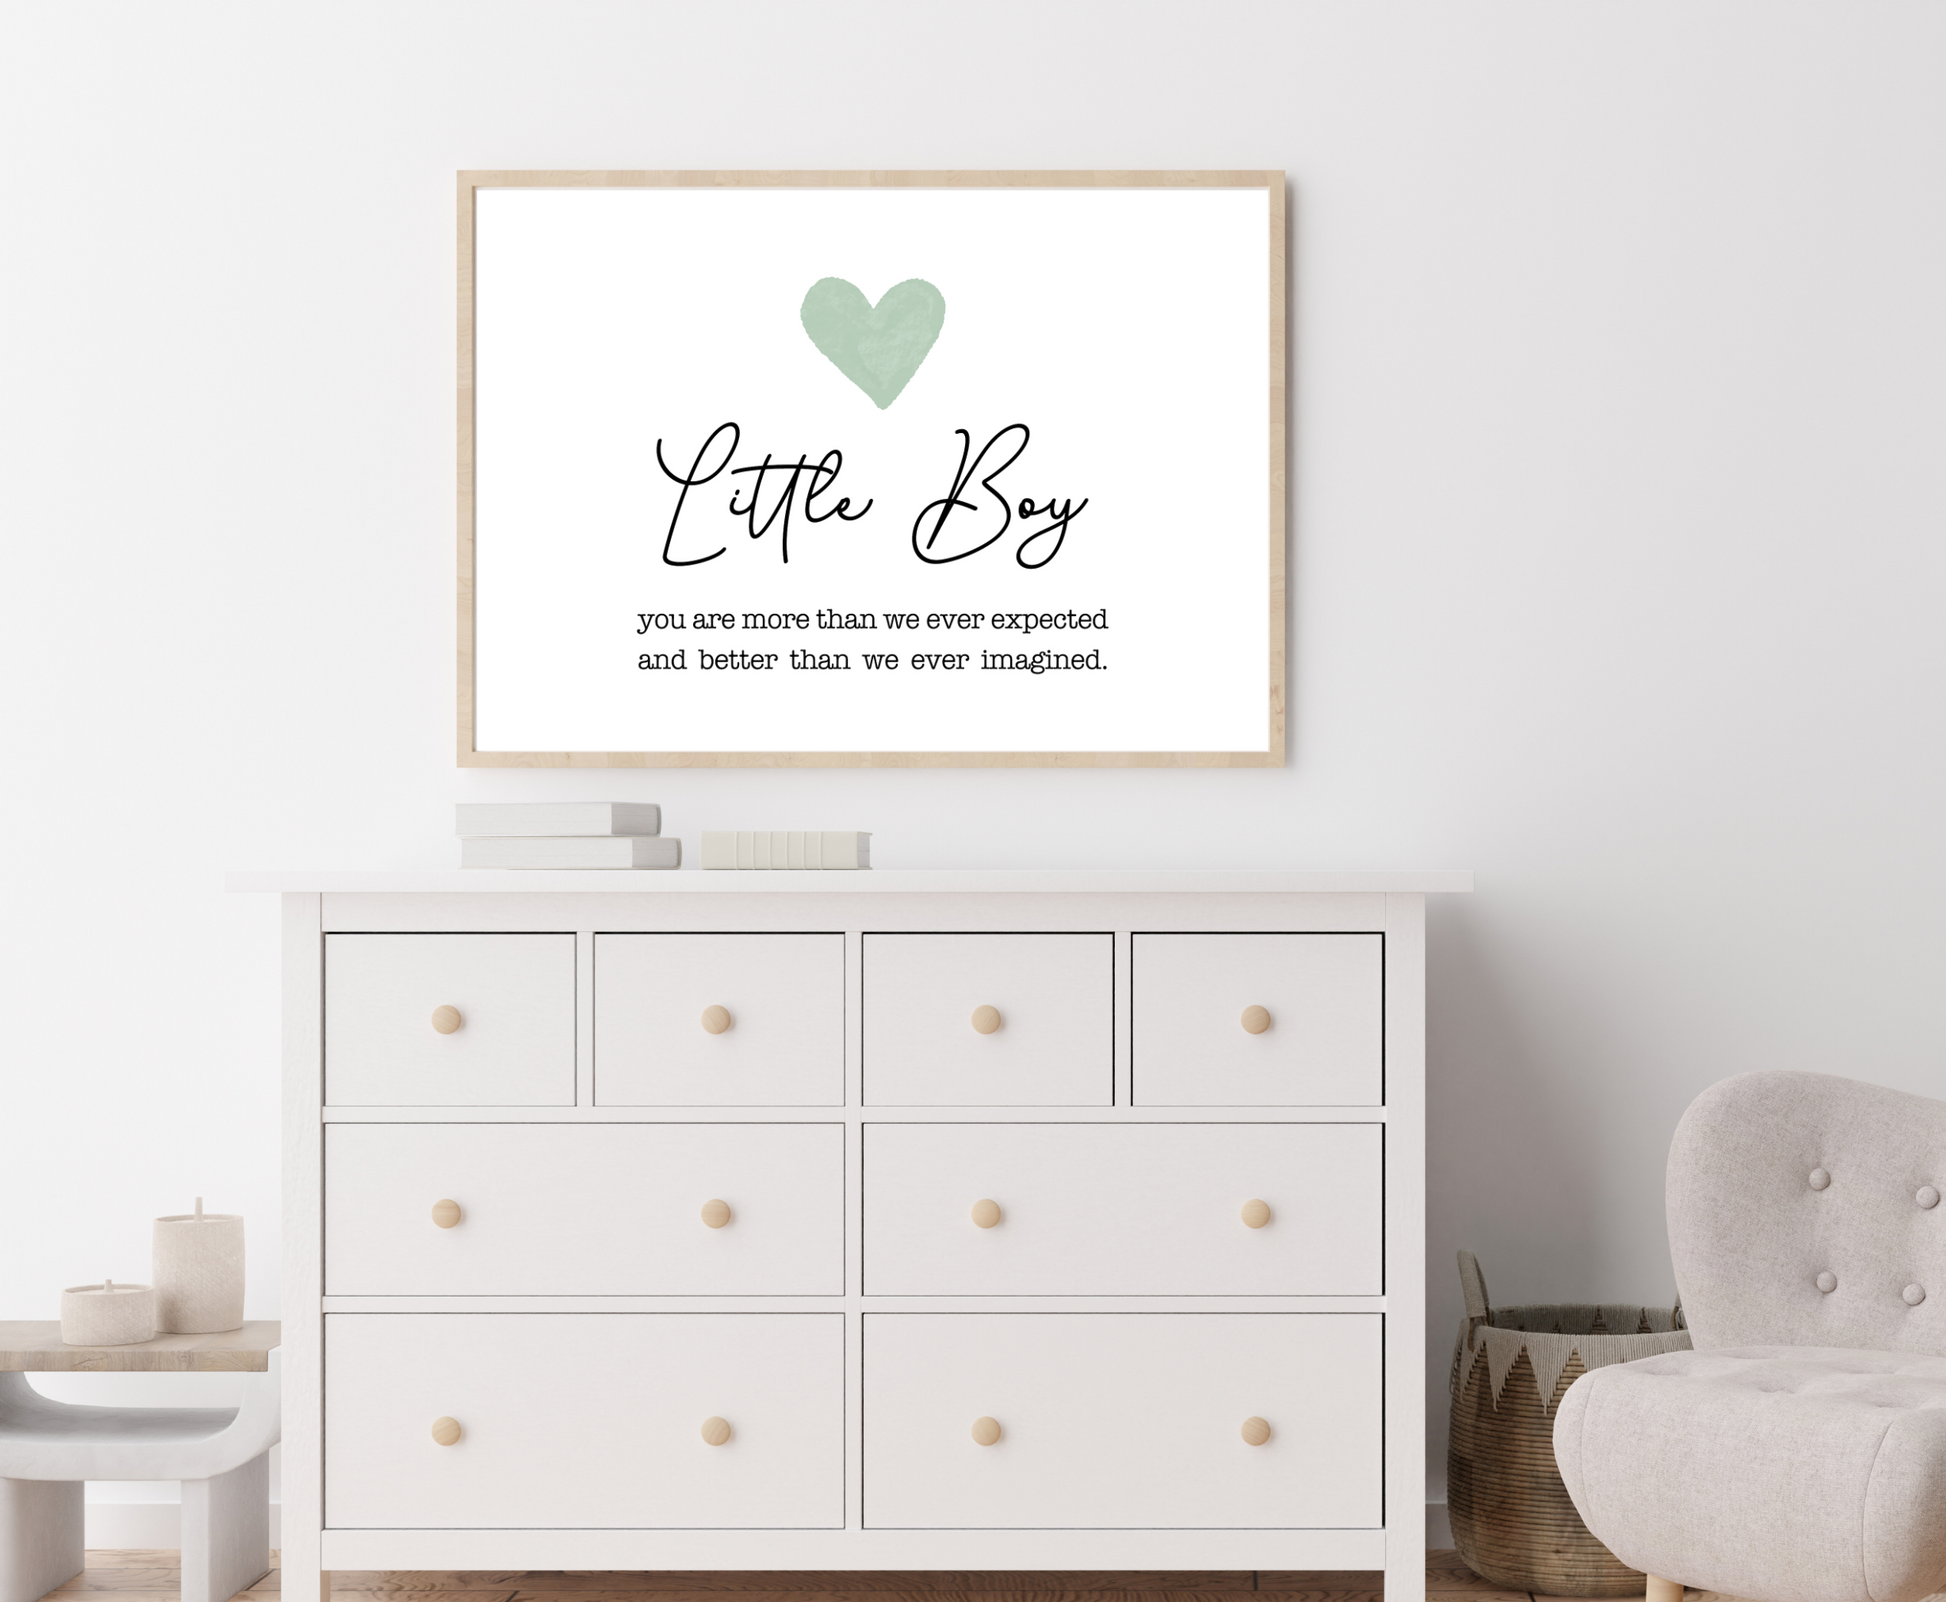 An image of a white dresser with a frame hanging on the wall behind it. The frame displays a baby green heart with a piece of writing below that says: you are more than we expected and better than we ever imagined.